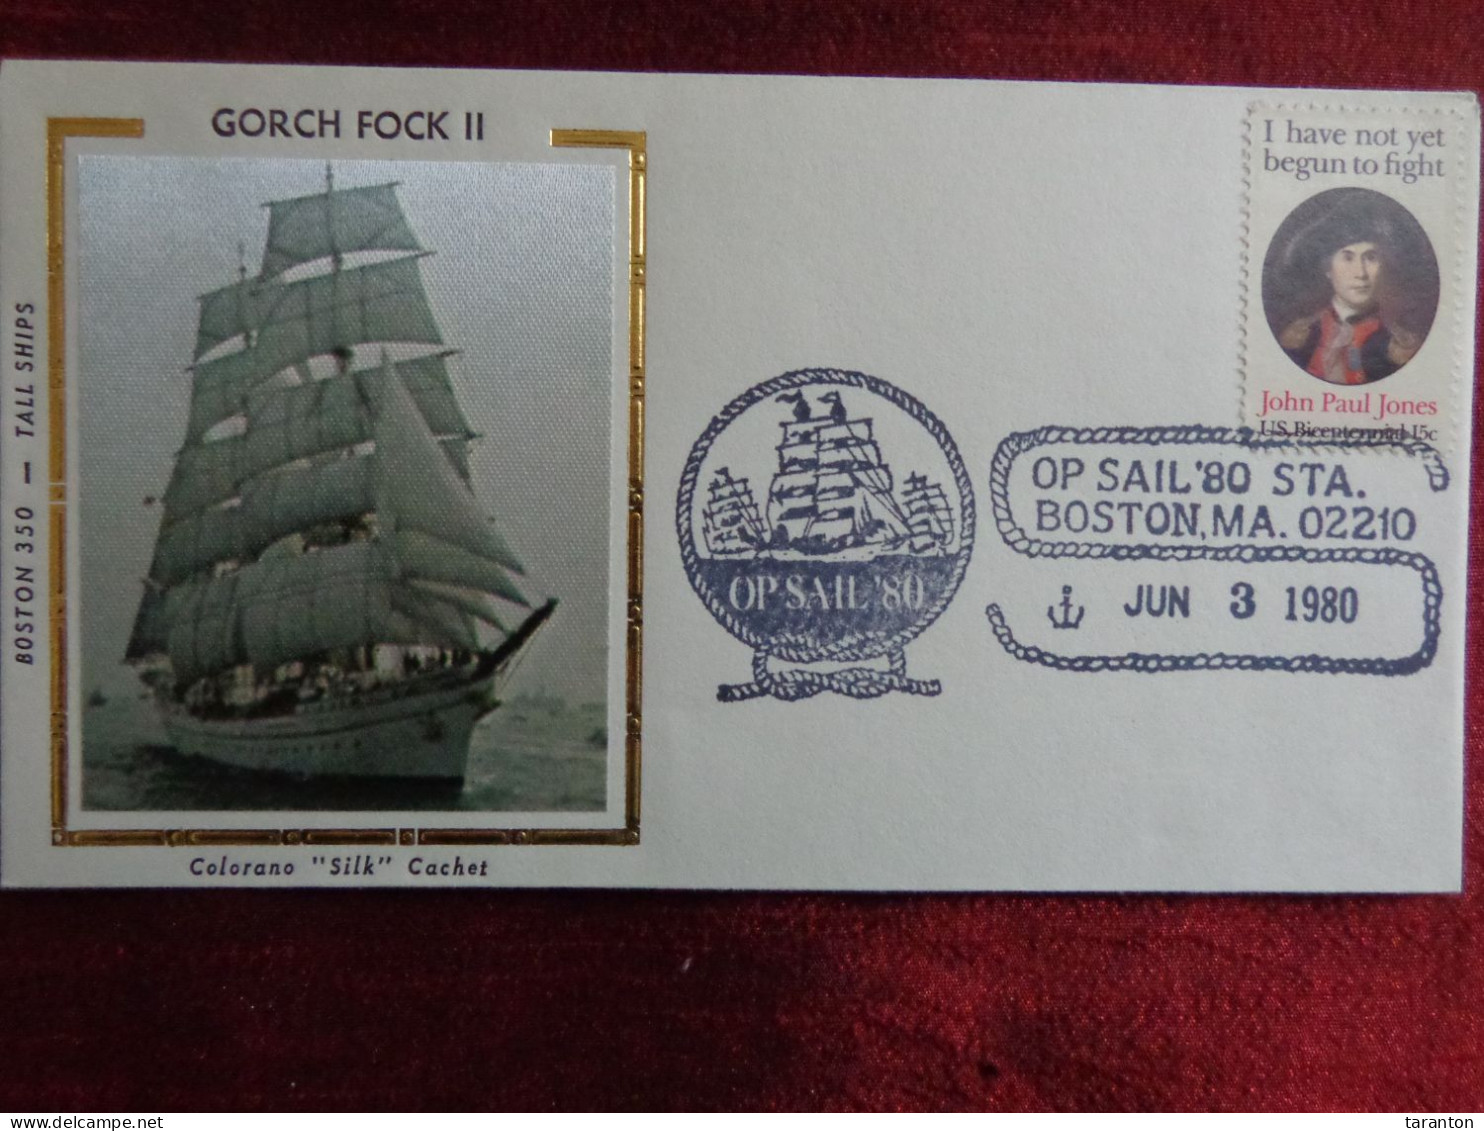 1980 - COVER - U.S.A., OP SAIL '80, TAIL SHIPS, GORK FOCK II - Collections (without Album)